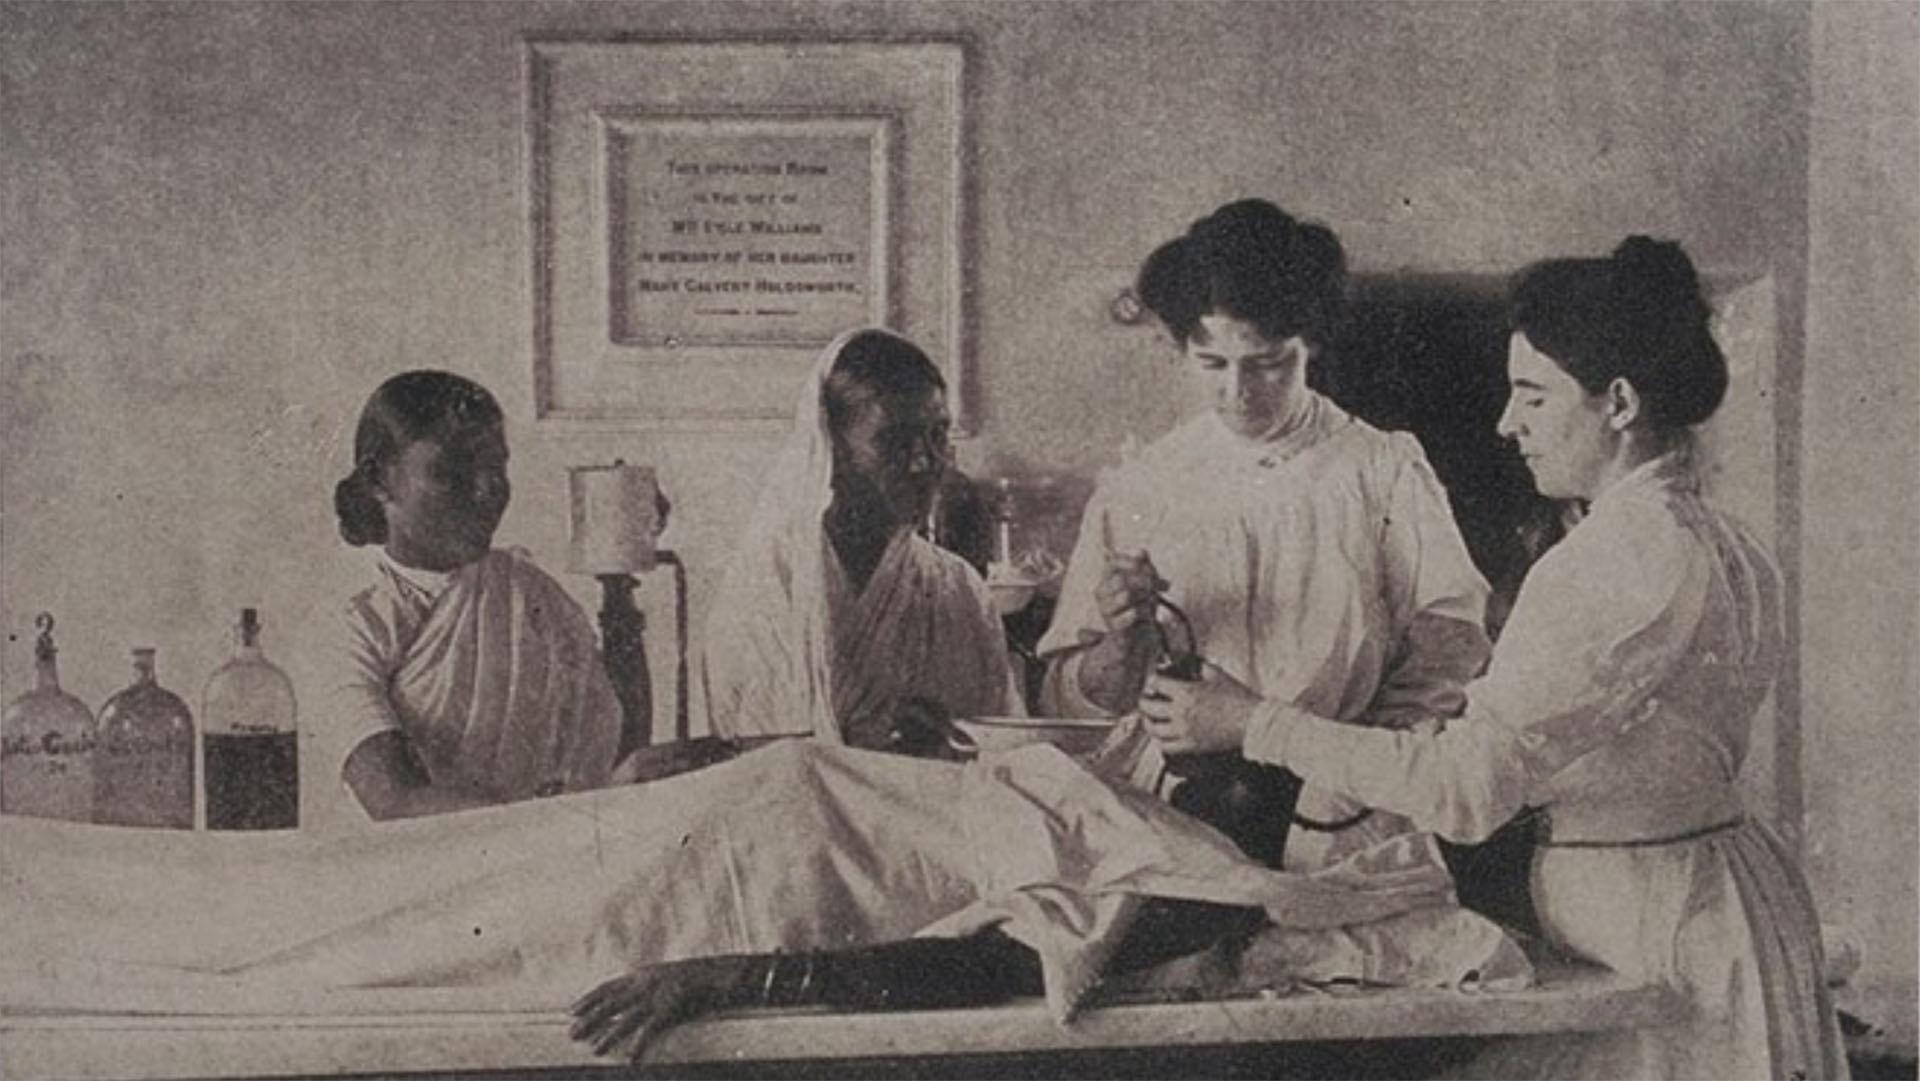 Daring Women Doctors: Physicians in the 19th Century | PBS